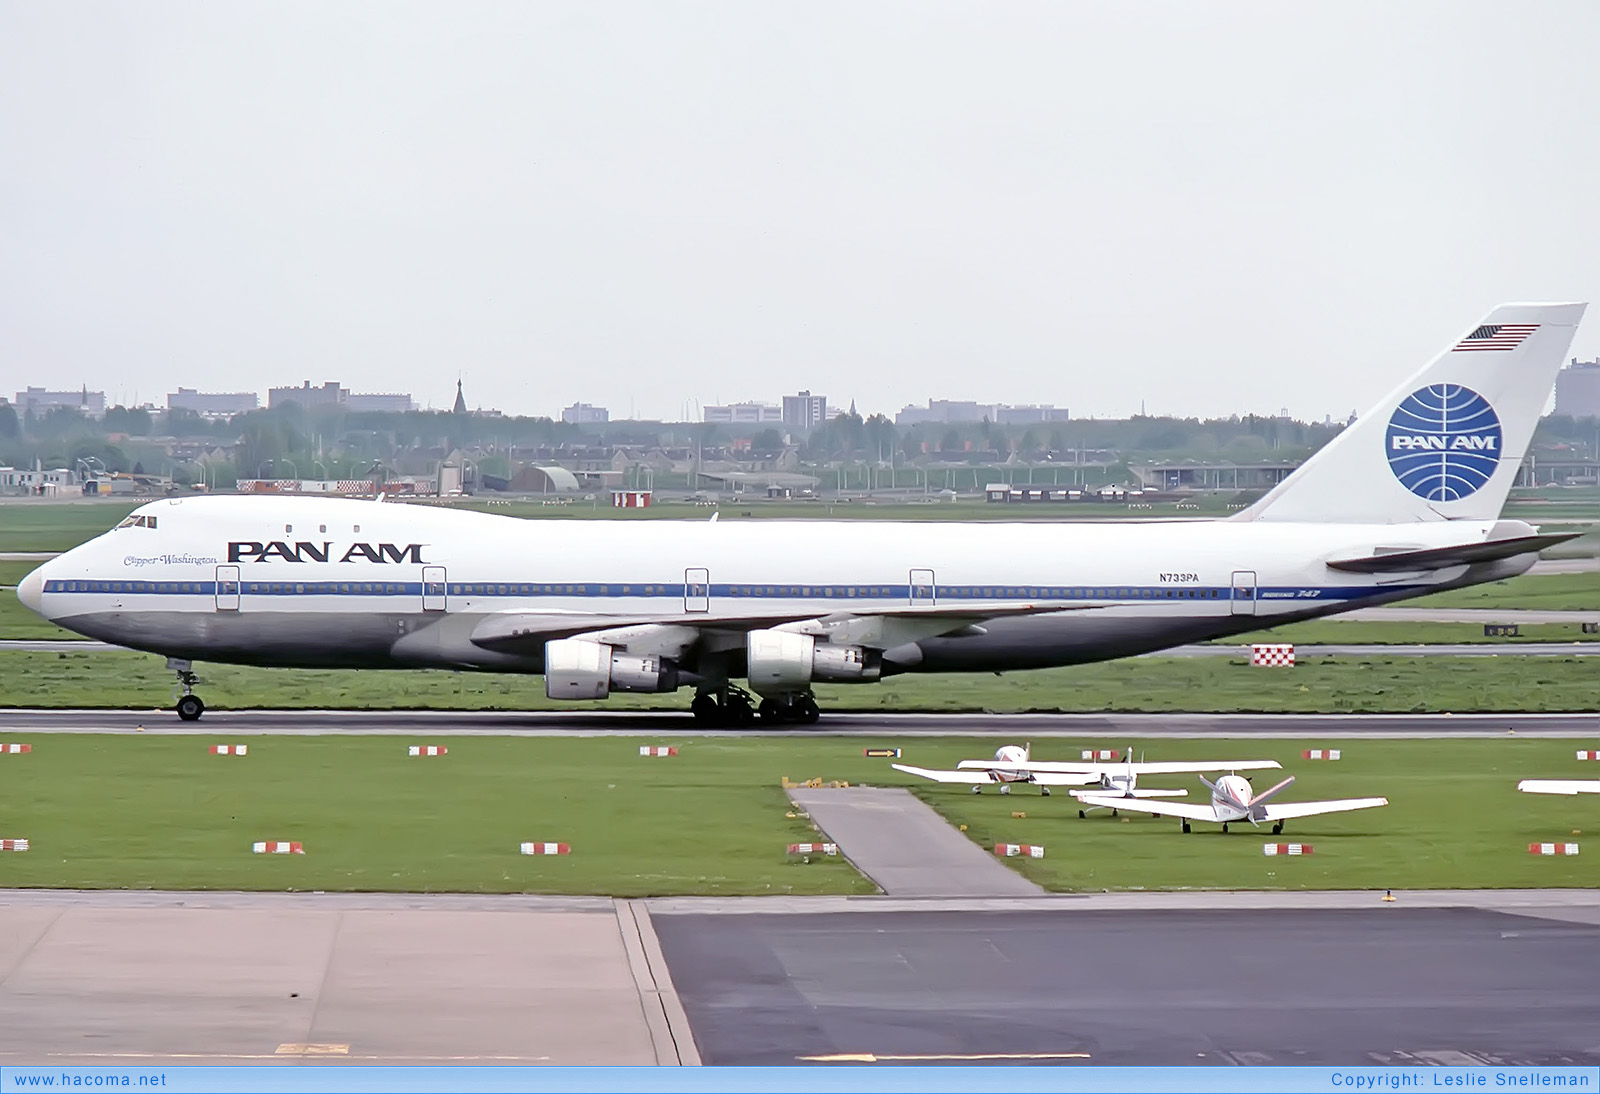 Photo of N733PA - Pan Am Clipper Young America / Constitution / Washington / Pride of the Sea / Air Express / Moscow Express - Amsterdam Airport Schiphol - May 21, 1977